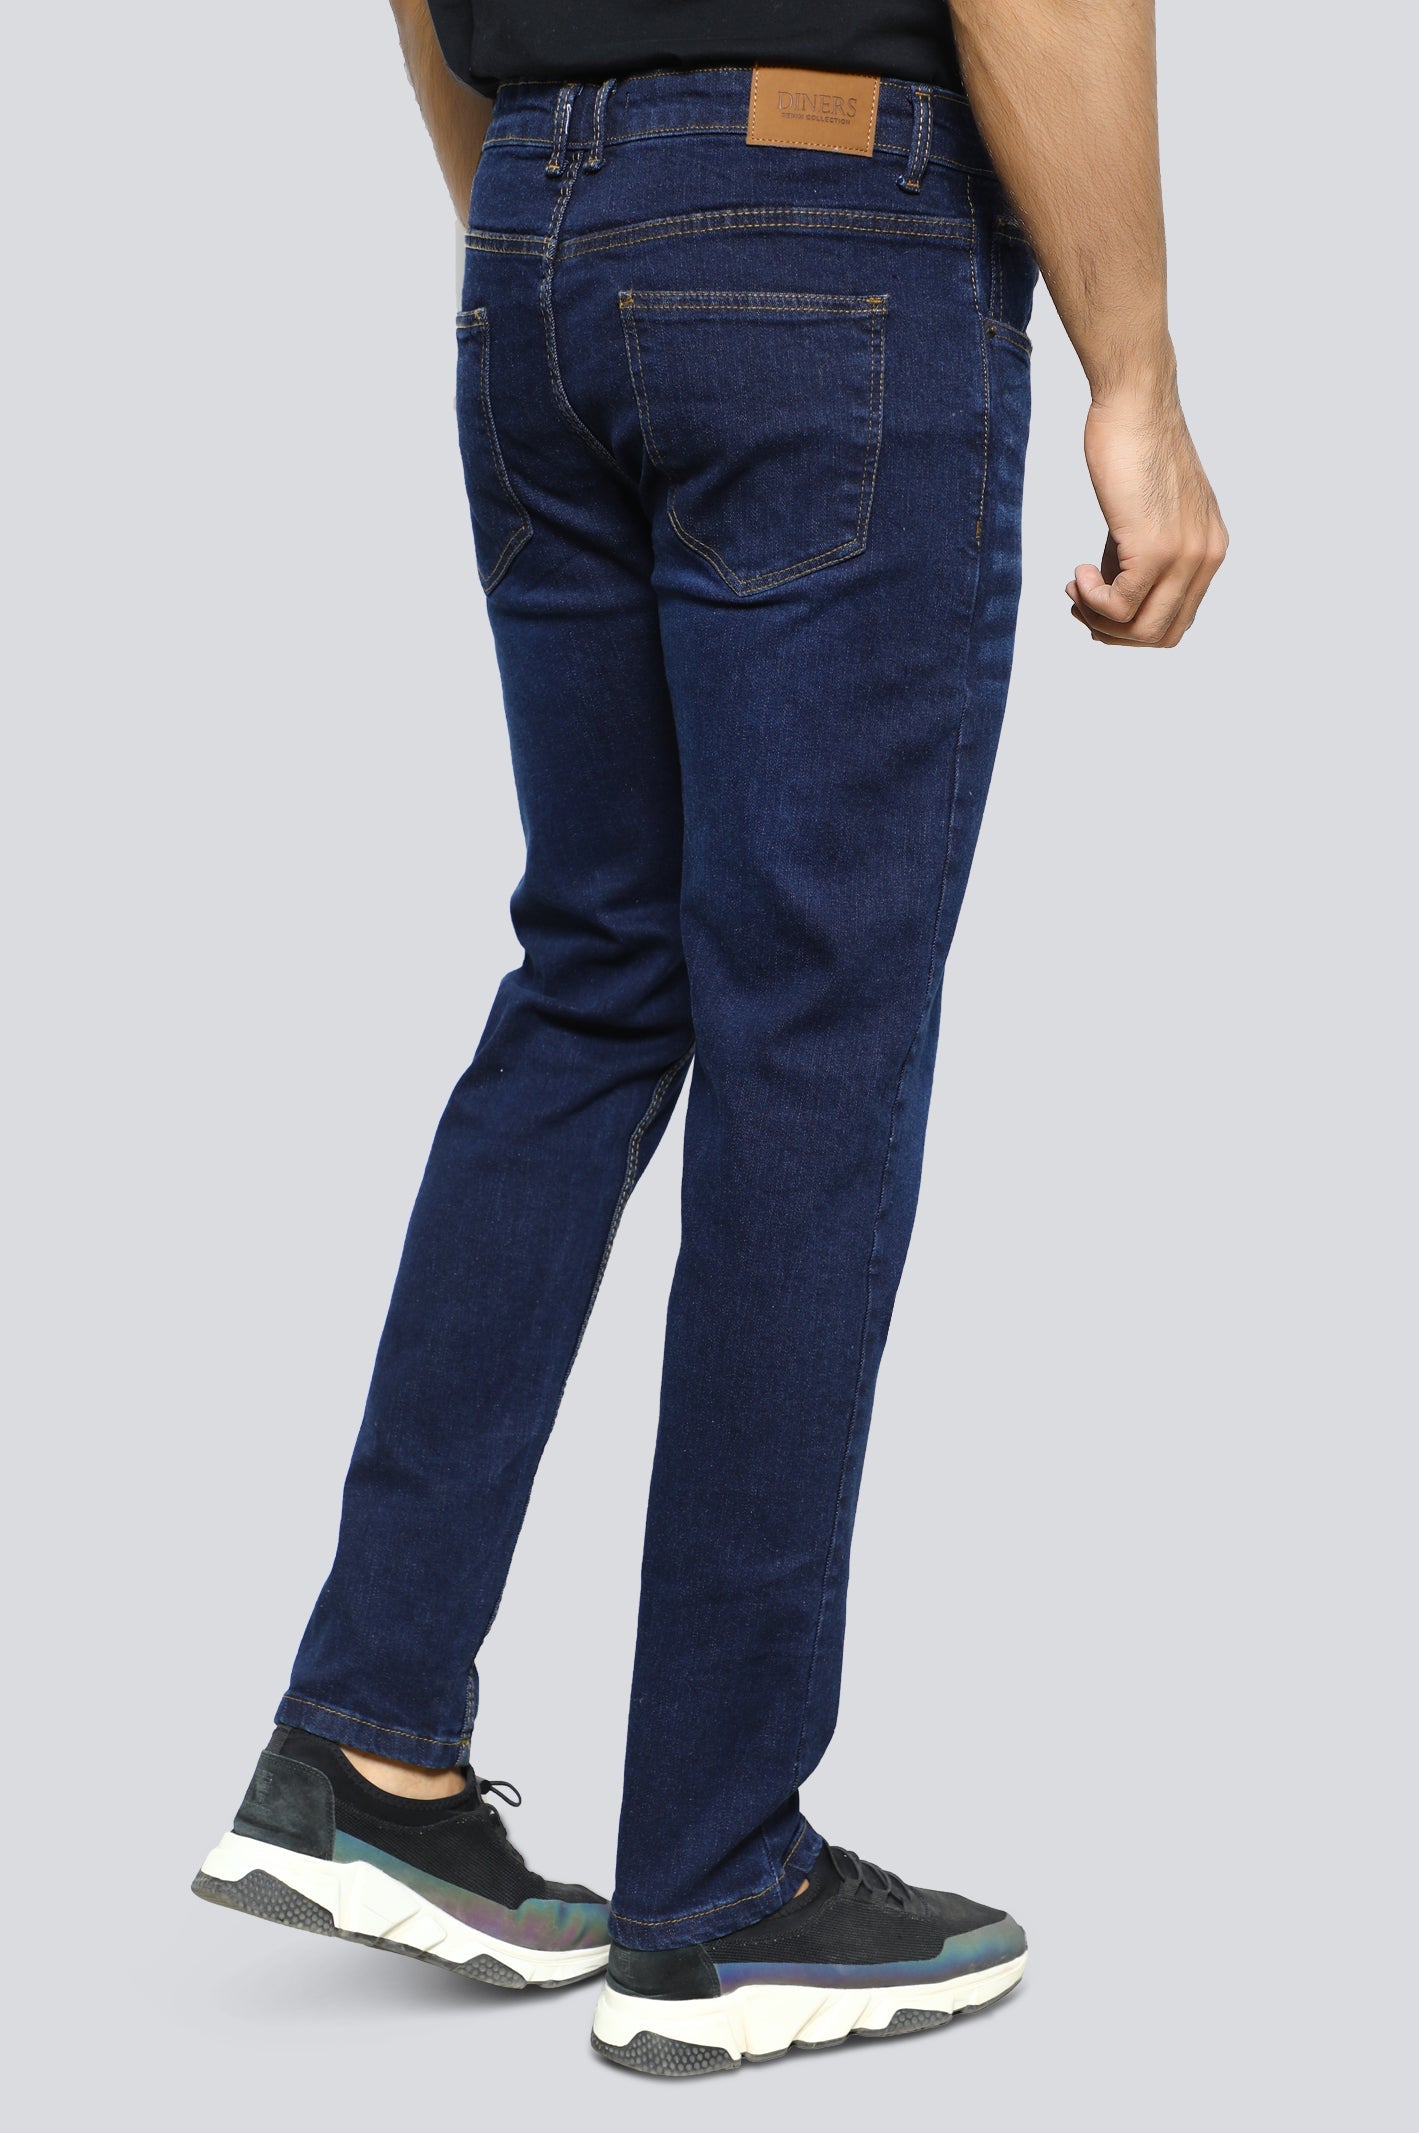 Casual Jeans For Men's - Diners